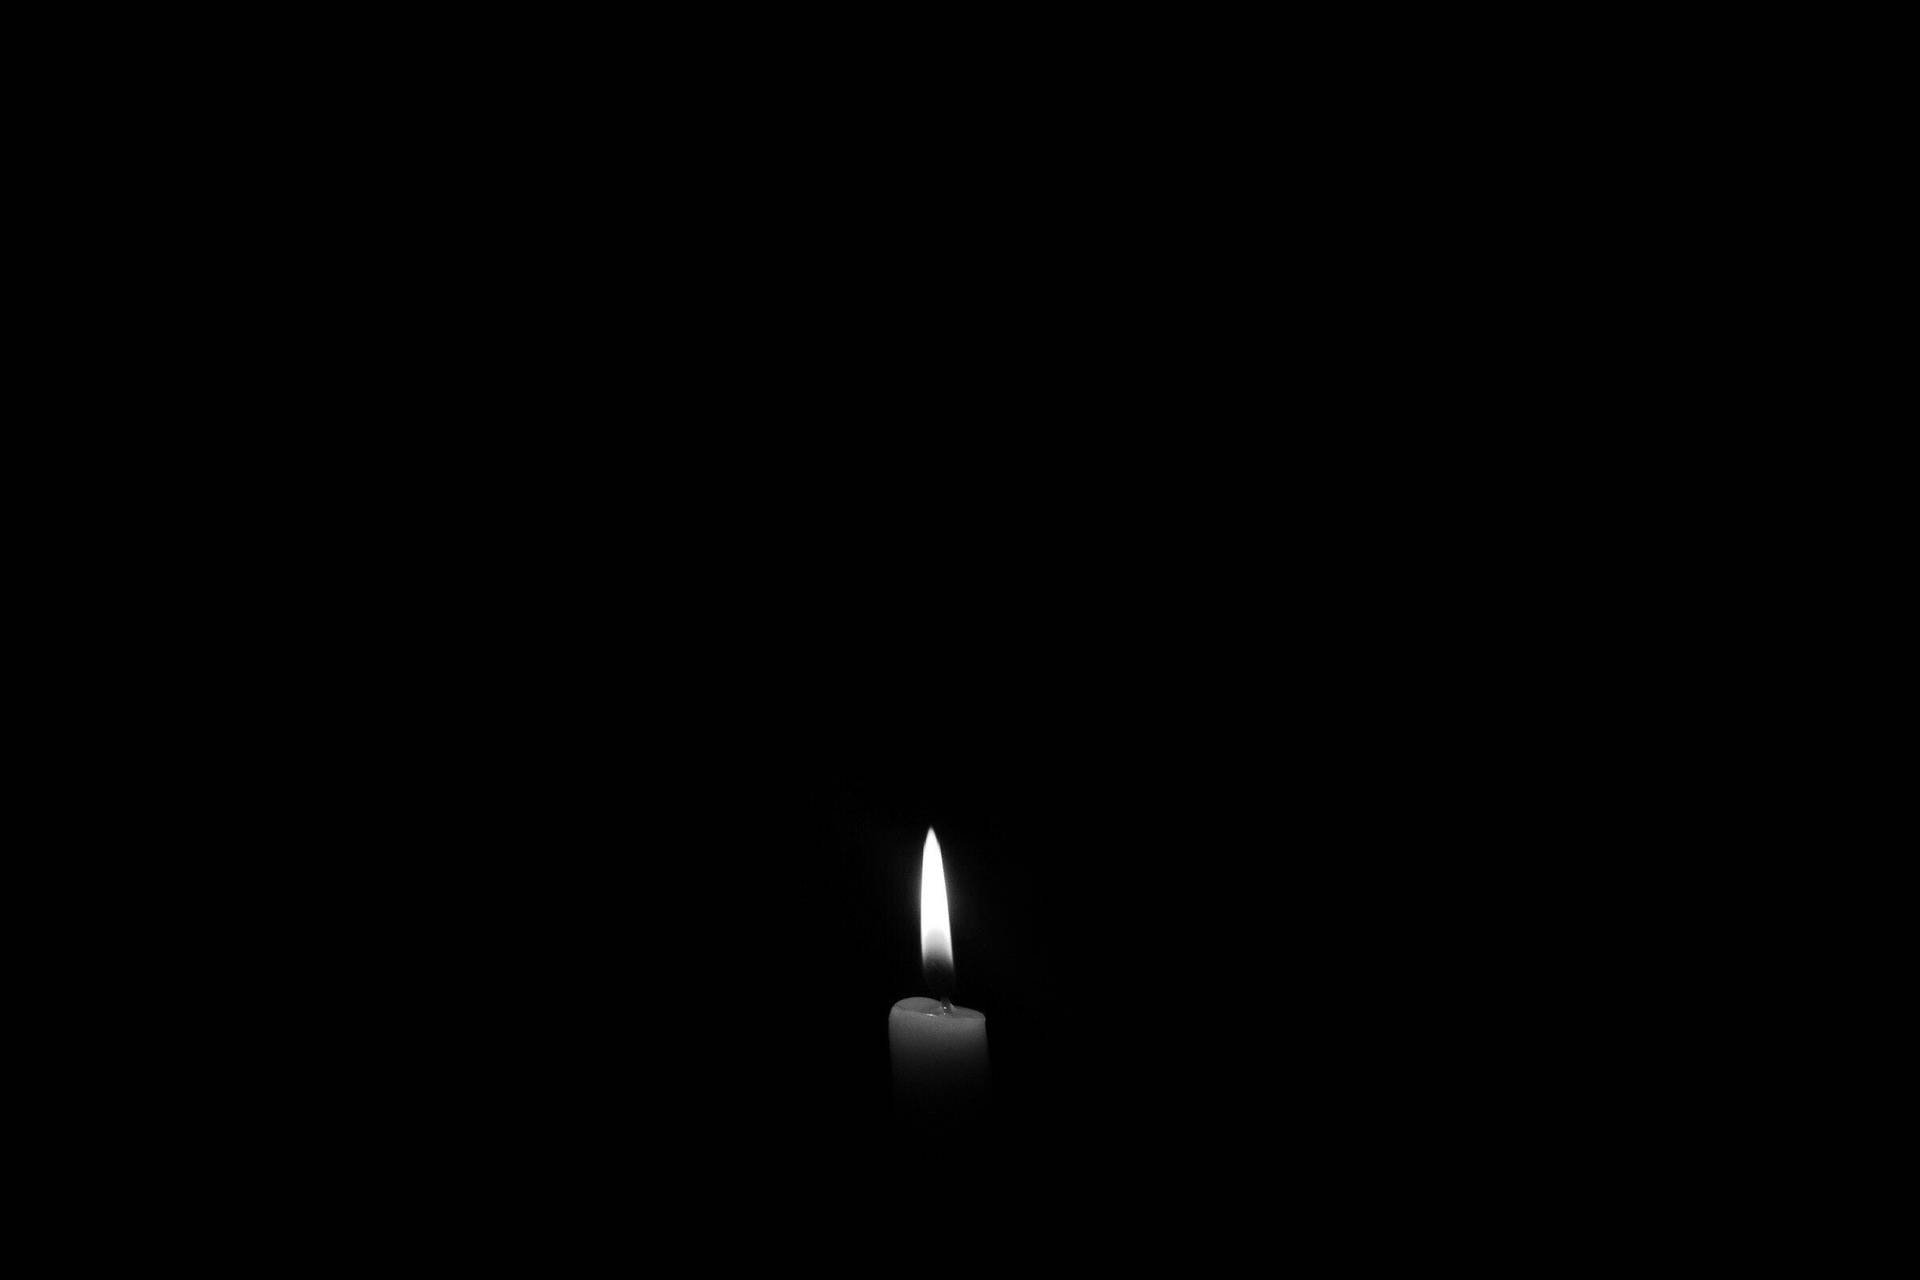 White Lit Candle Over Dark Screen Background